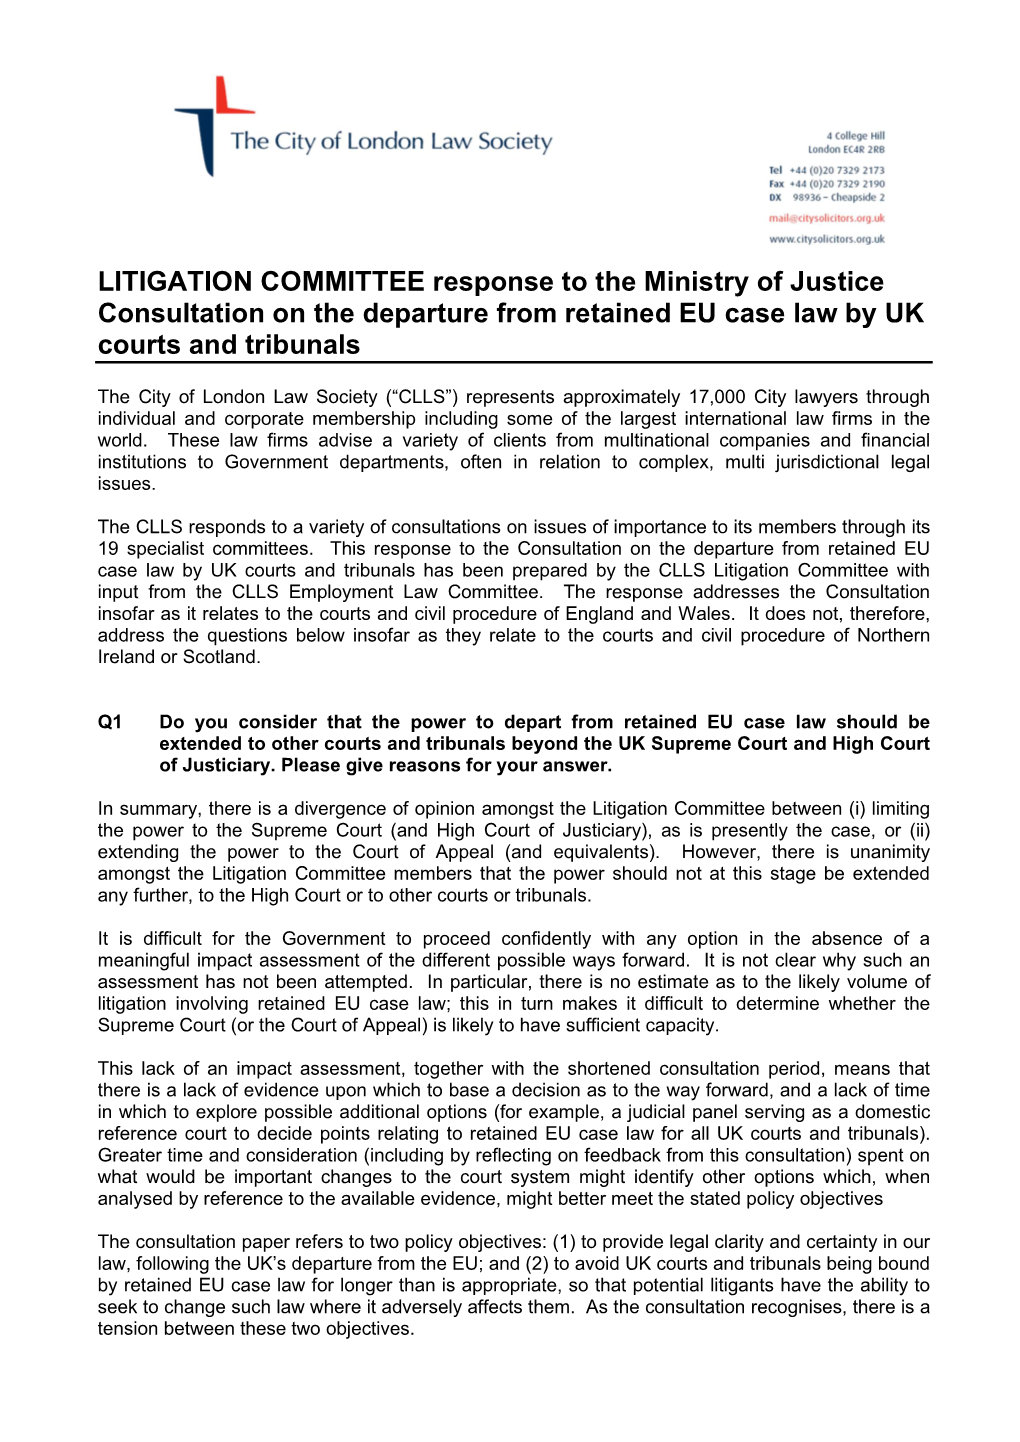 LITIGATION COMMITTEE Response to the Ministry of Justice Consultation on the Departure from Retained EU Case Law by UK Courts and Tribunals